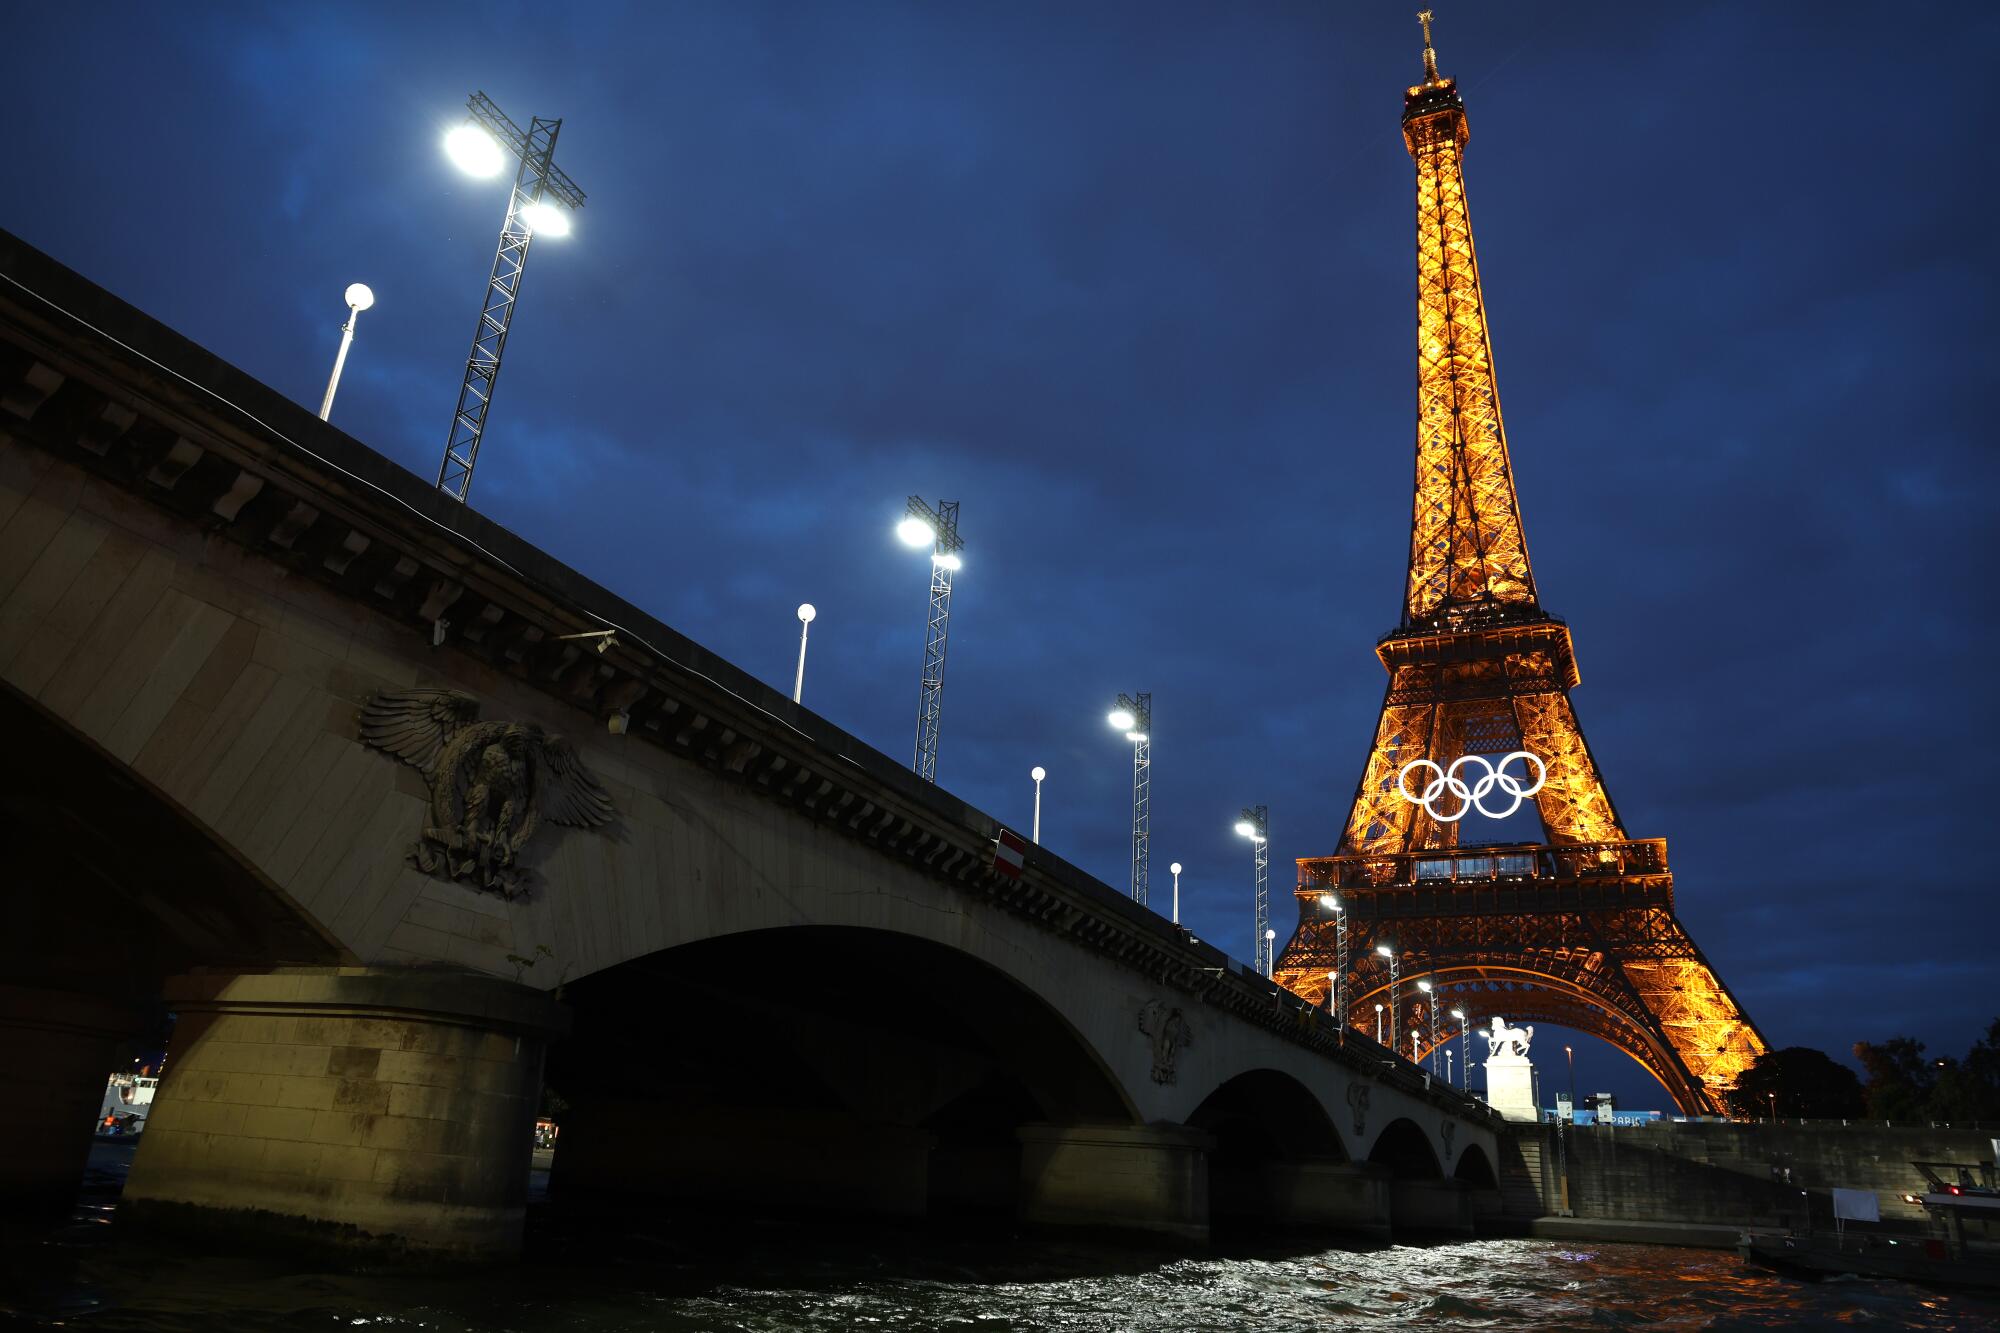 The Eiffel Tower shines brightly at night as the Seine River rushes under a bridge nearby.